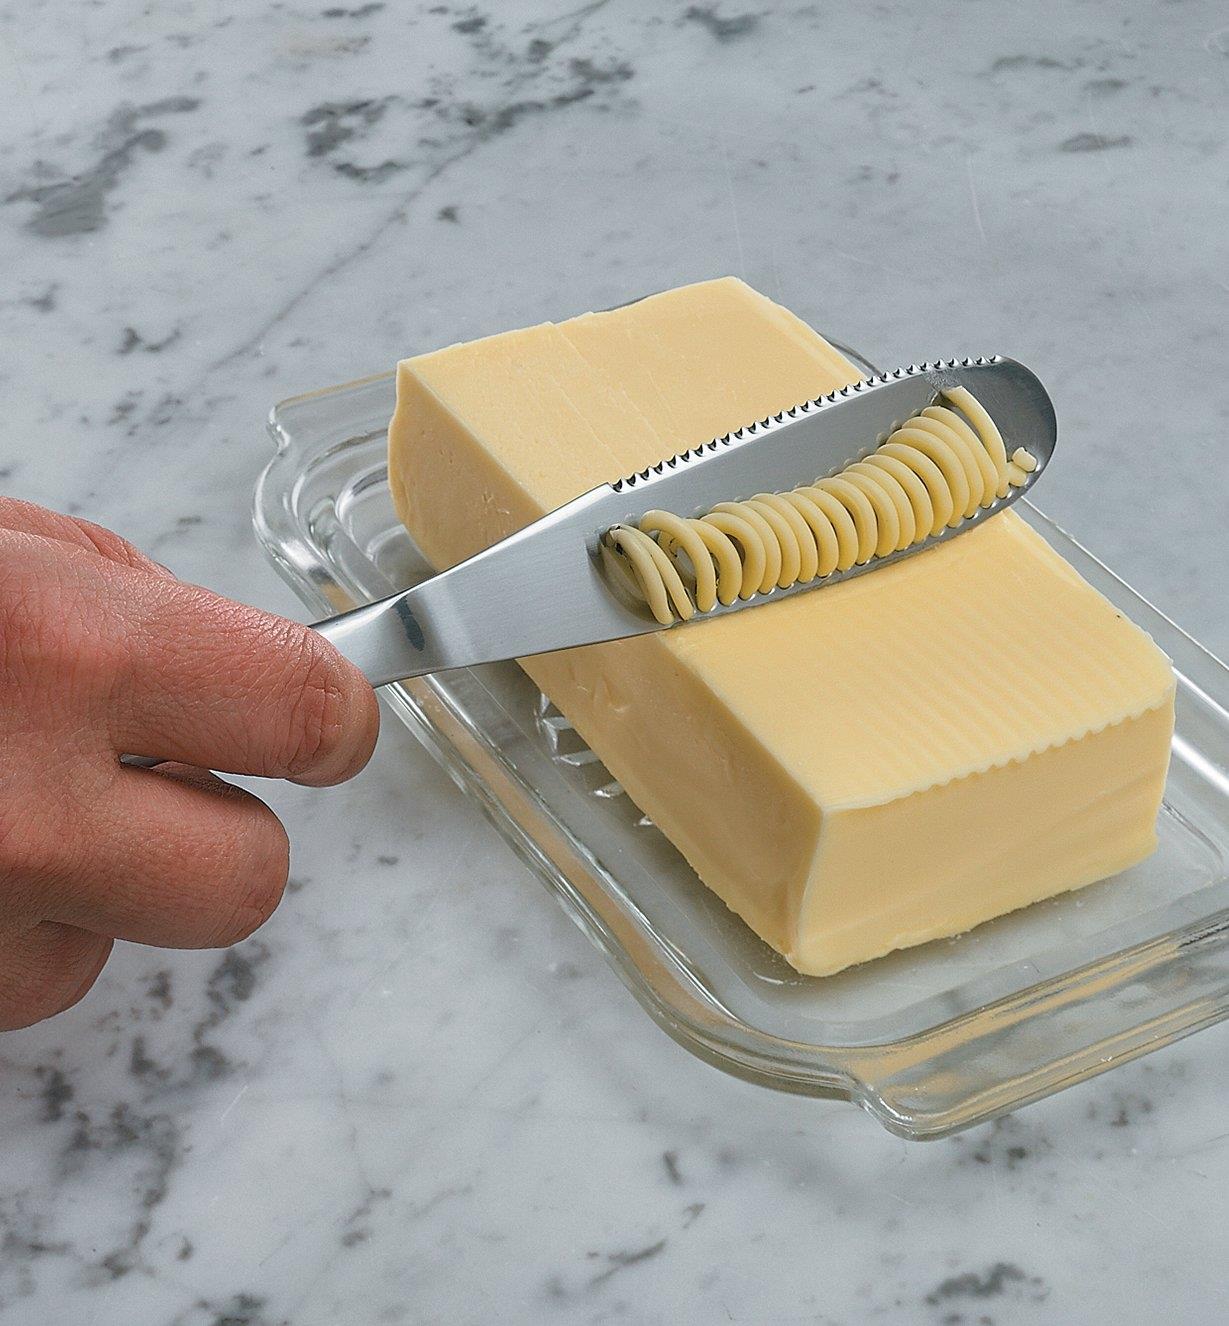 Drawing the knife across a block of butter, creating thin ribbons